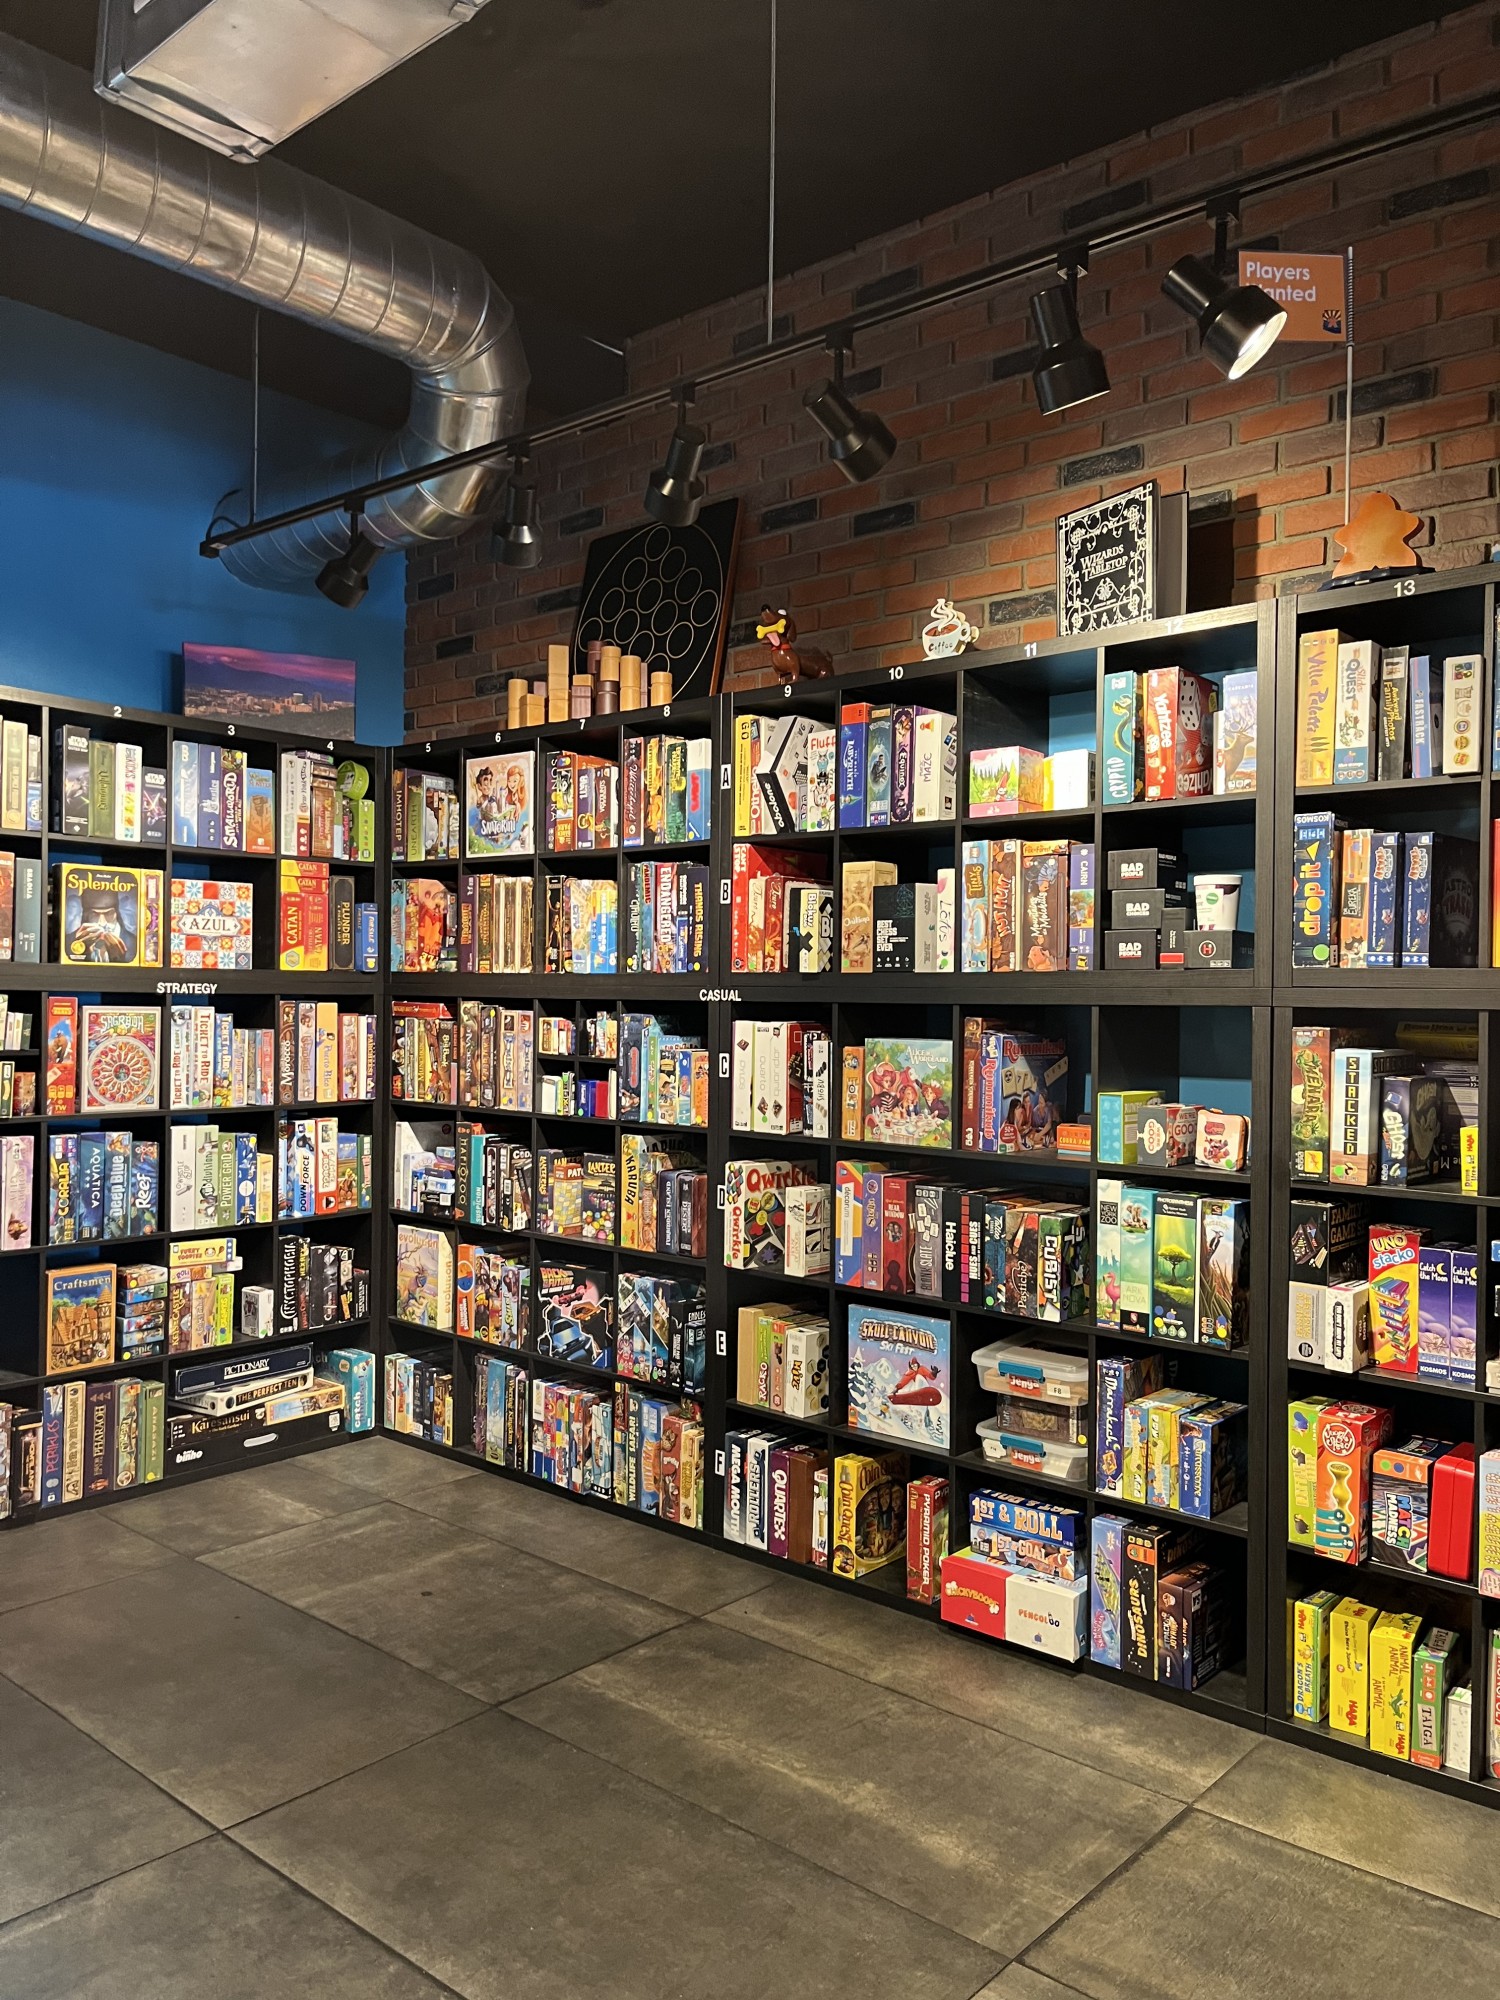 The back wall of Snakes & Lattes has three walls dedicated to any board game you can think of. Open until 10 p.m. during the week and midnight on Friday and Saturday, grab your friends to game the night away! 